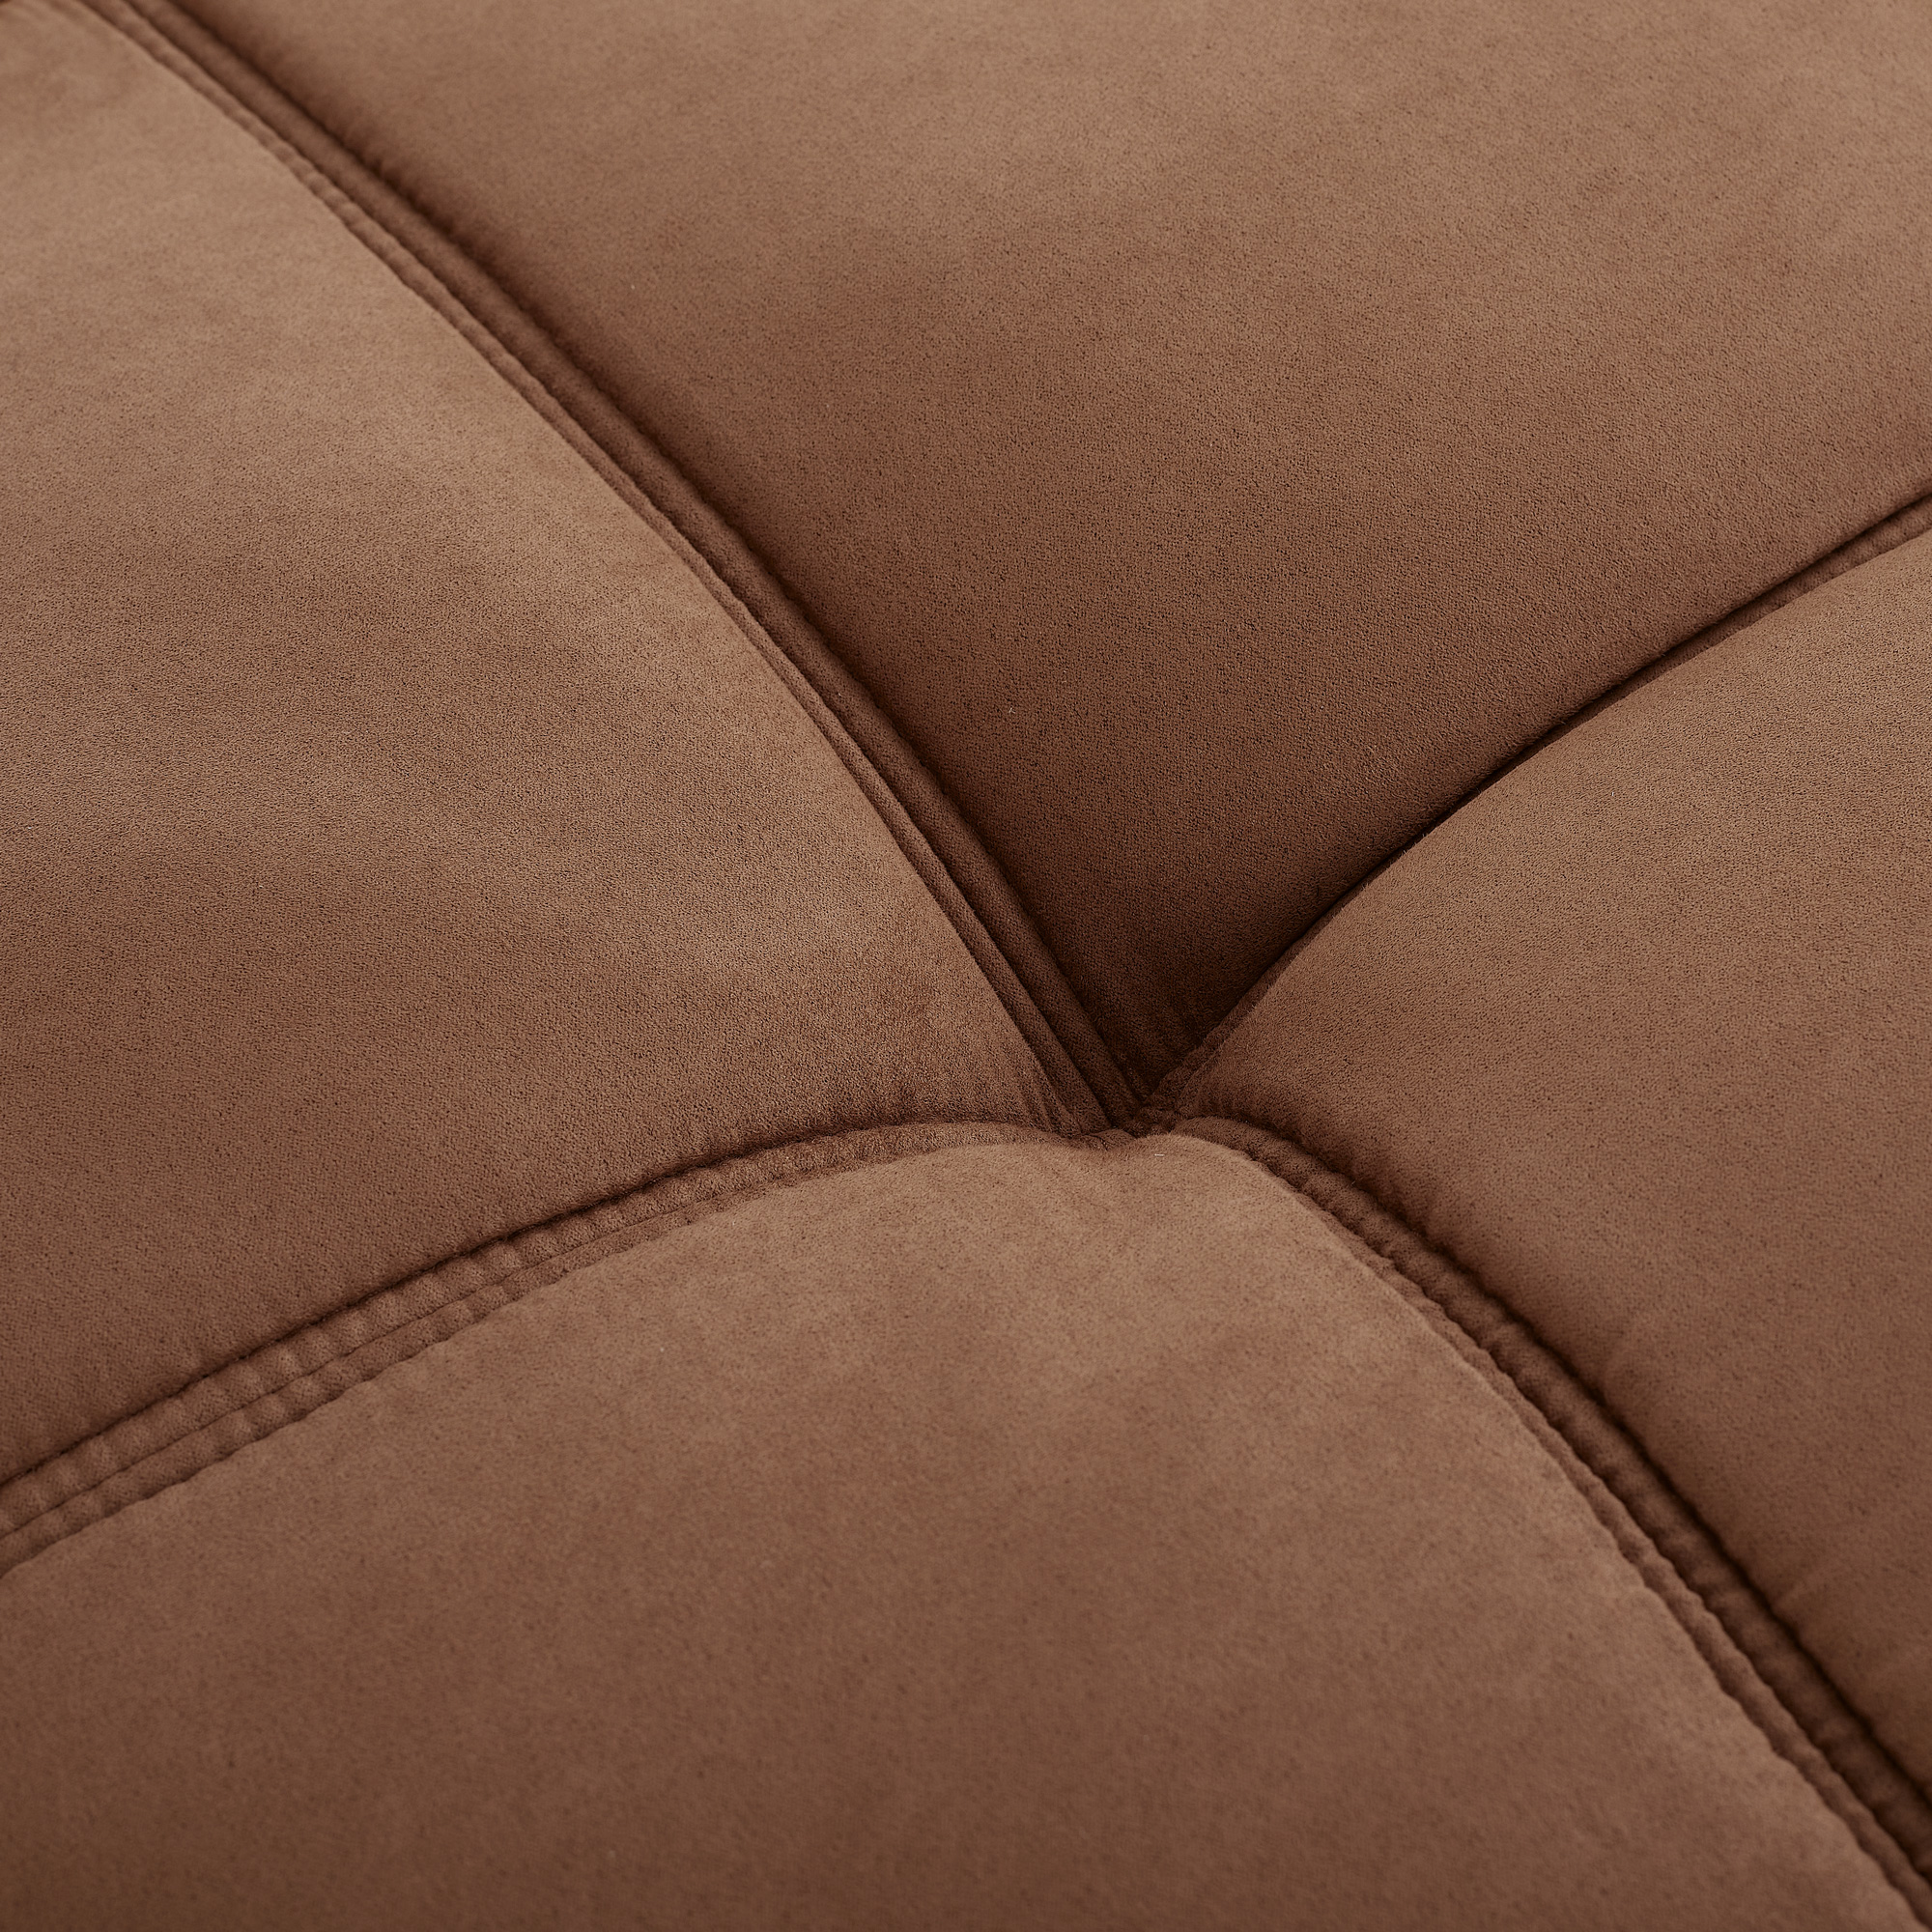 Mainstays Memory Foam Futon with Adjustable Armrests , Camel Faux Suede Fabric for Adults - image 8 of 9